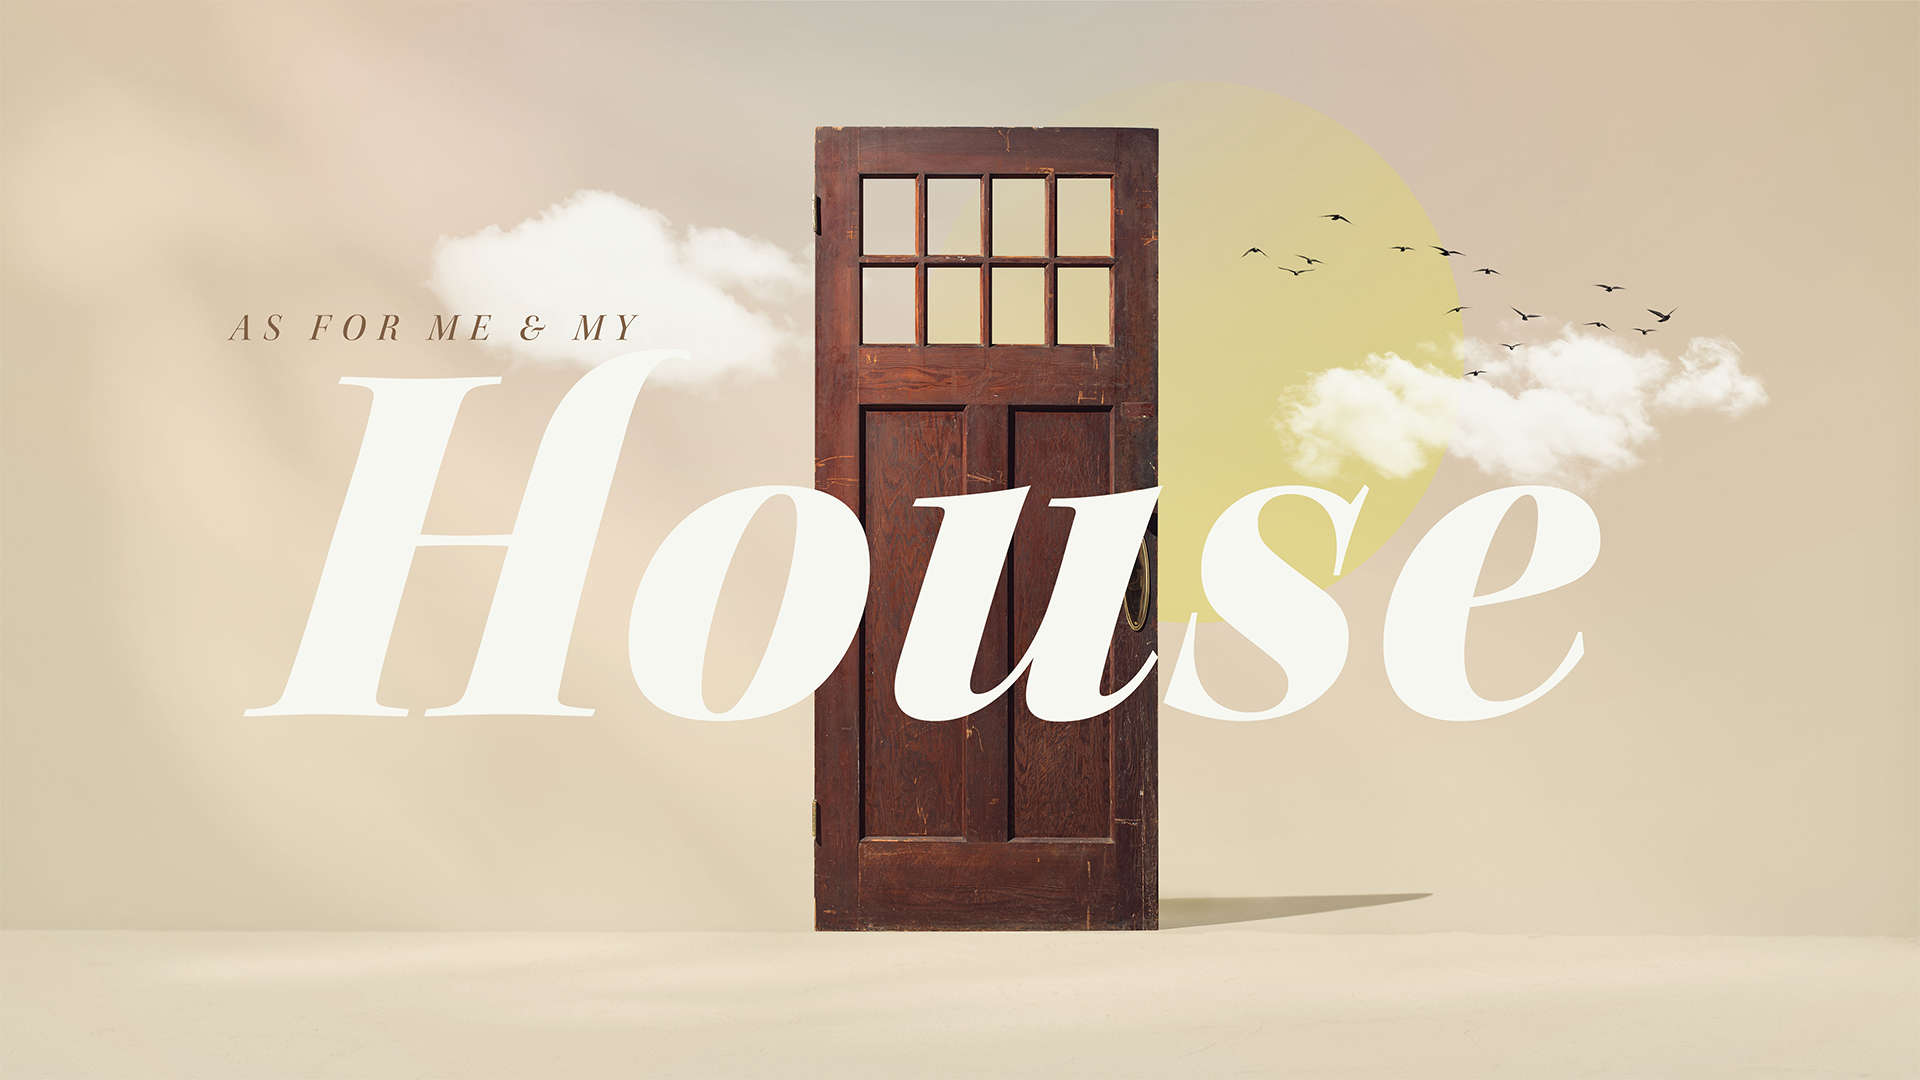 Link to the As For Me & My House Series Group Curriculum